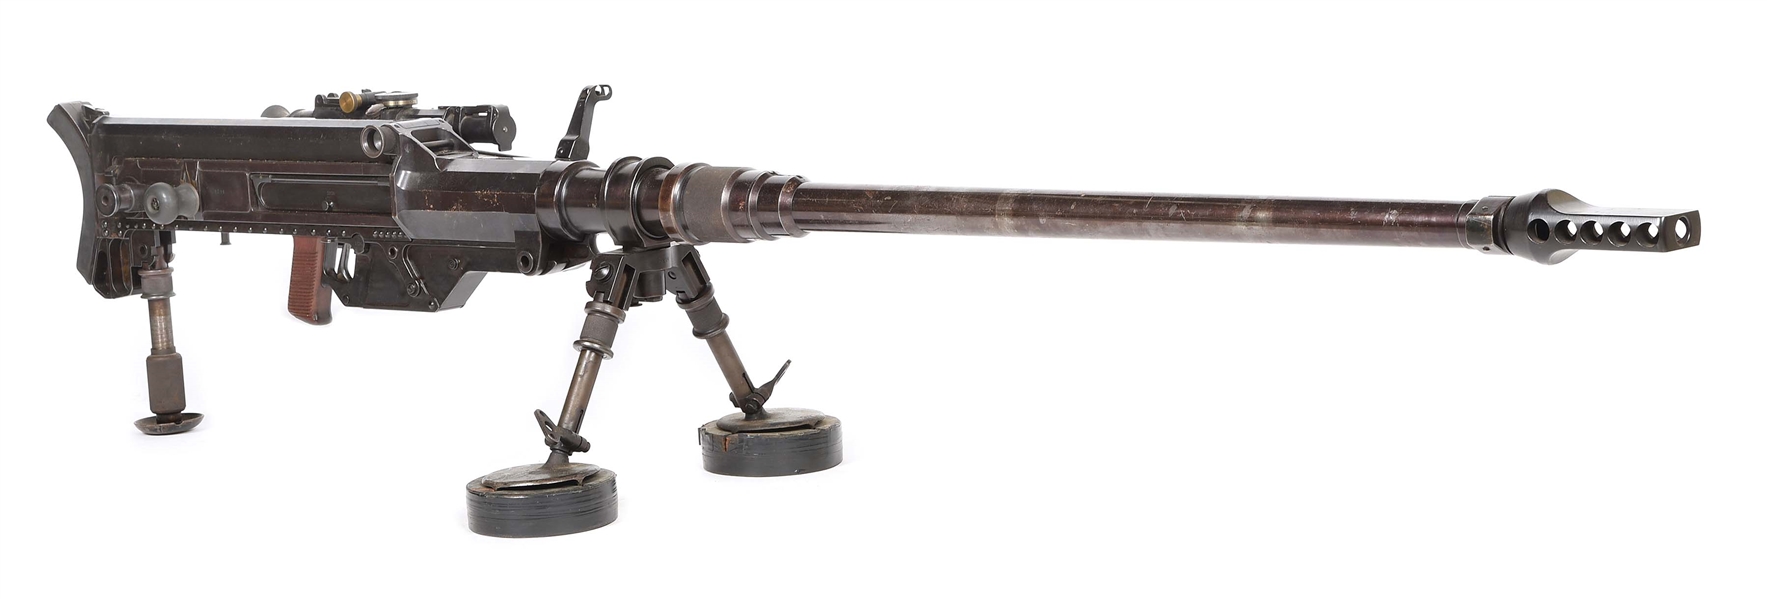 (D) EXCEPTIONAL MATCHING SOLOTHURN S18-1000 ANTI-TANK RIFLE (DESTRUCTIVE DEVICE) (CURIO AND RELIC).